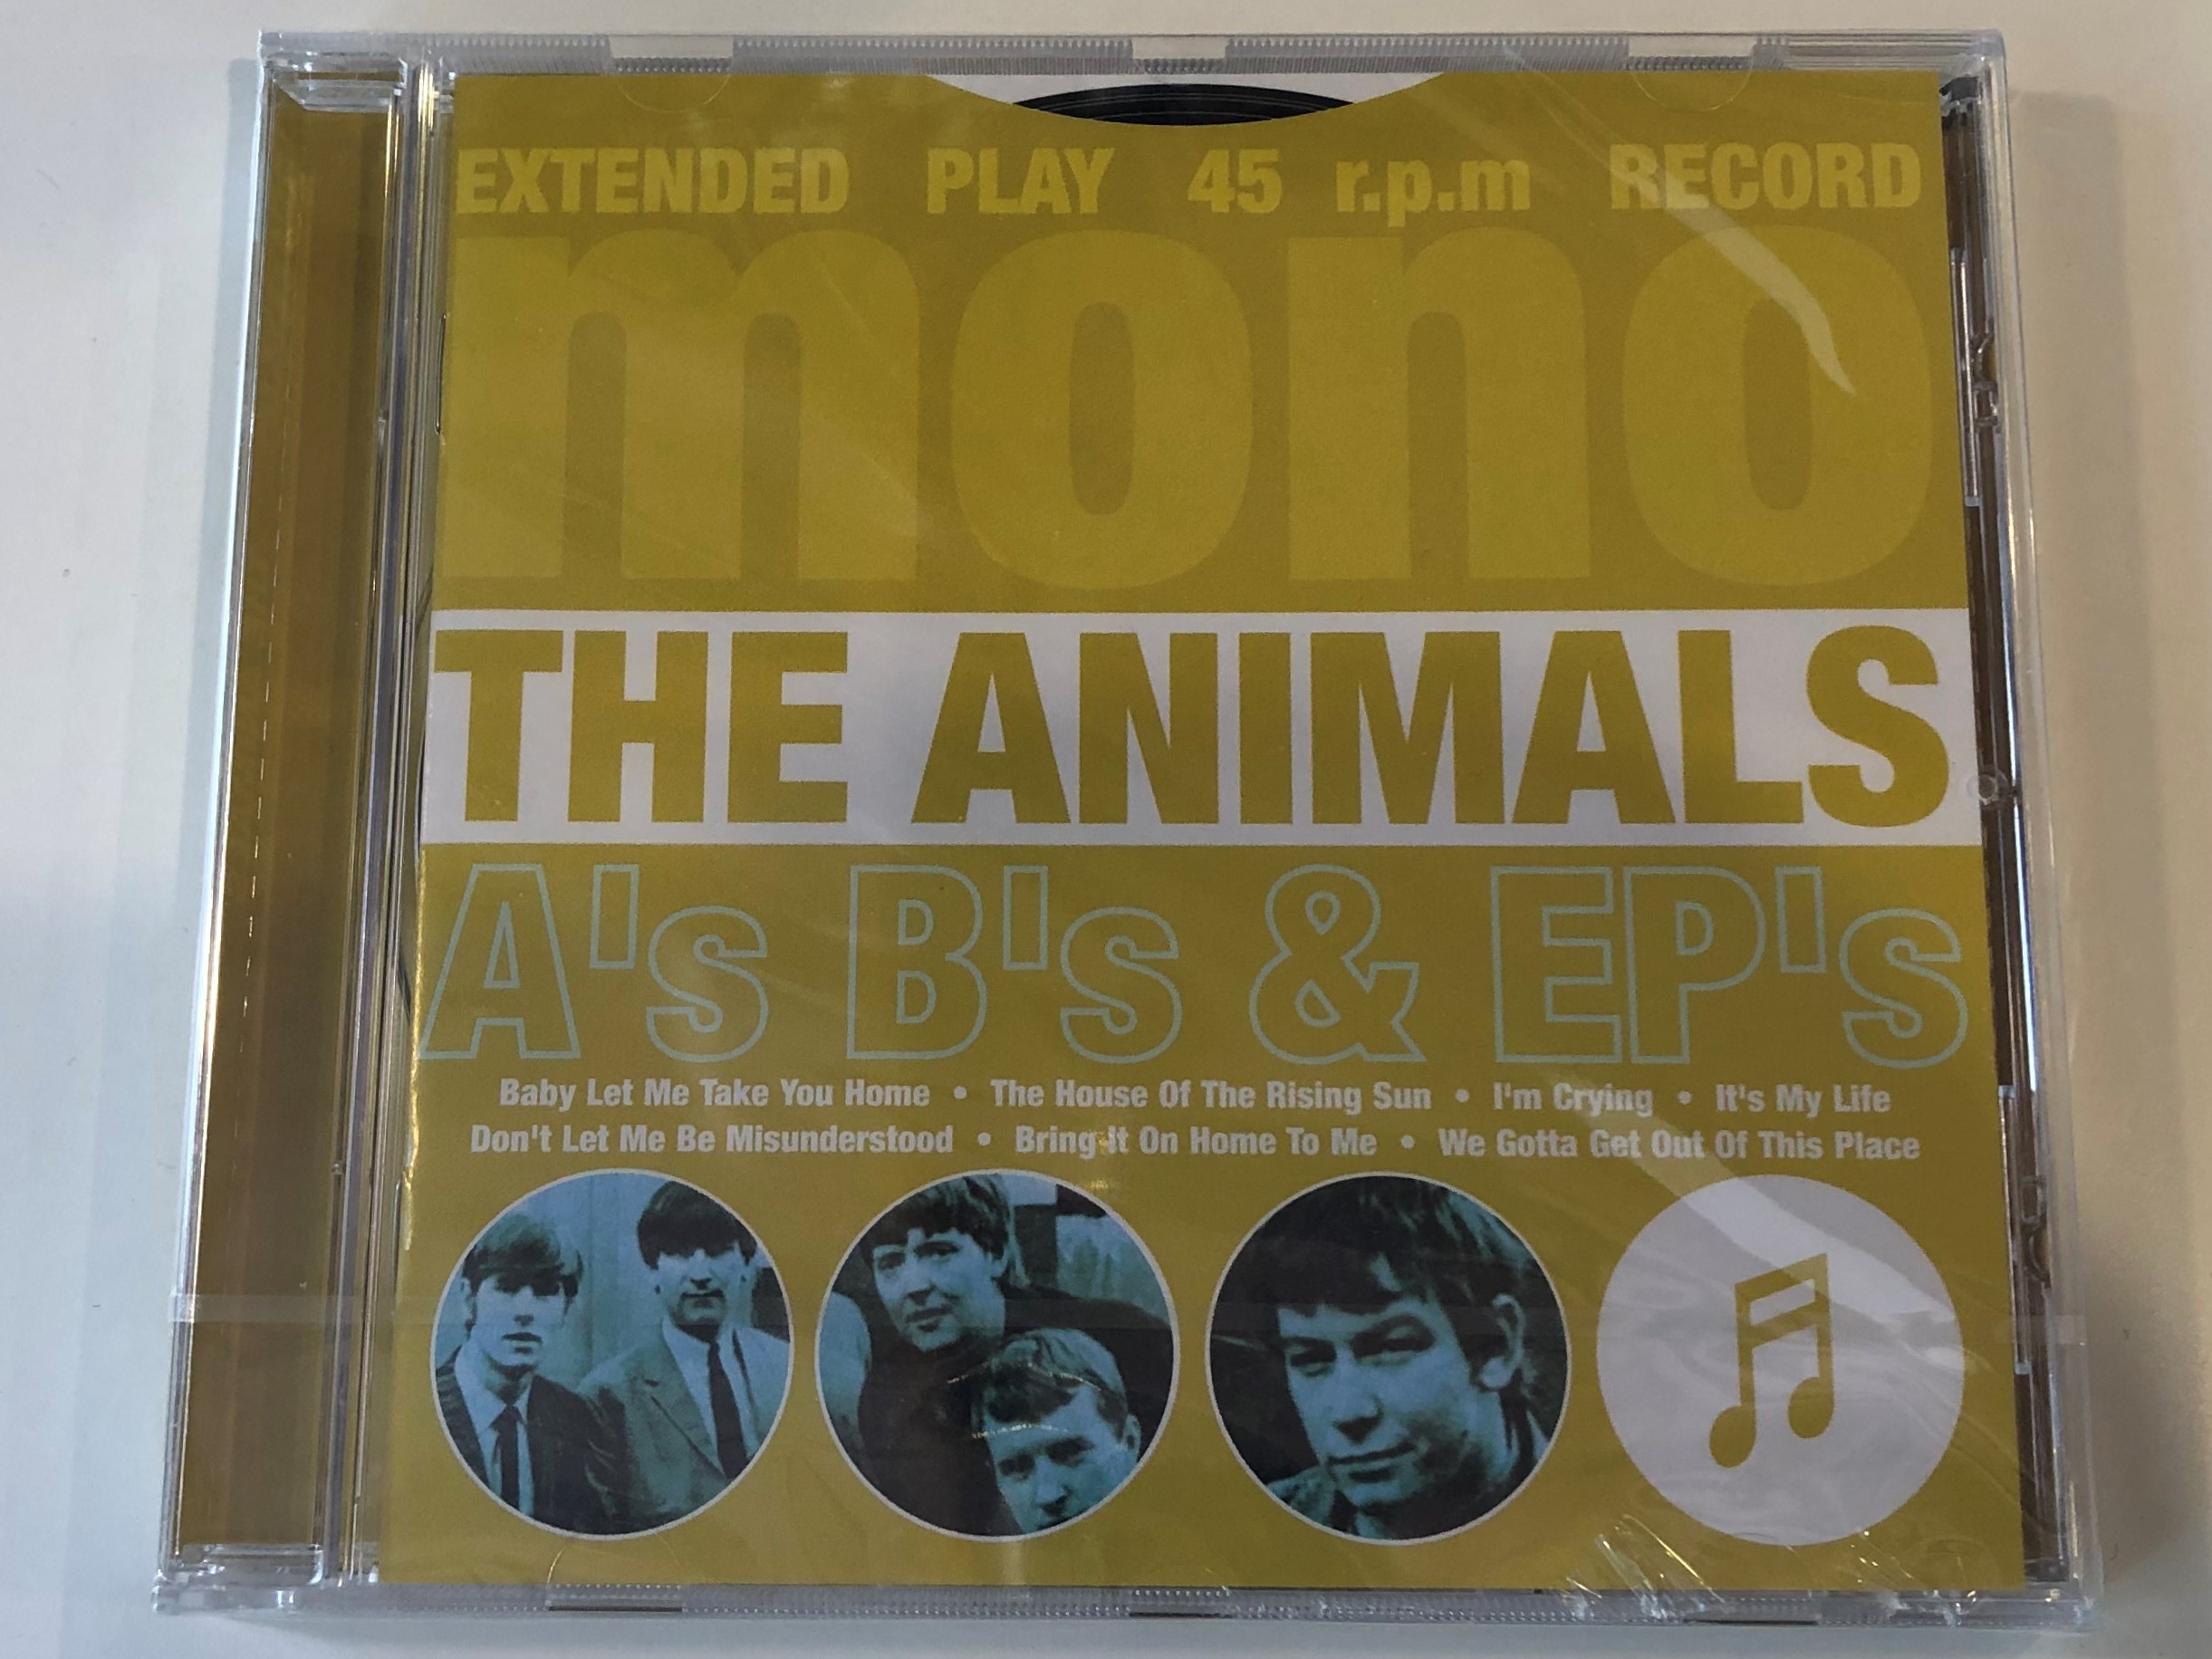 the-animals-a-s-b-s-ep-s-extended-play-45-r.p.m-record-mono-baby-let-me-take-you-home-the-house-of-the-rising-sun-i-m-crying-it-s-my-life-don-t-let-me-be-misunderstood-bring-it-on-home-1-.jpg